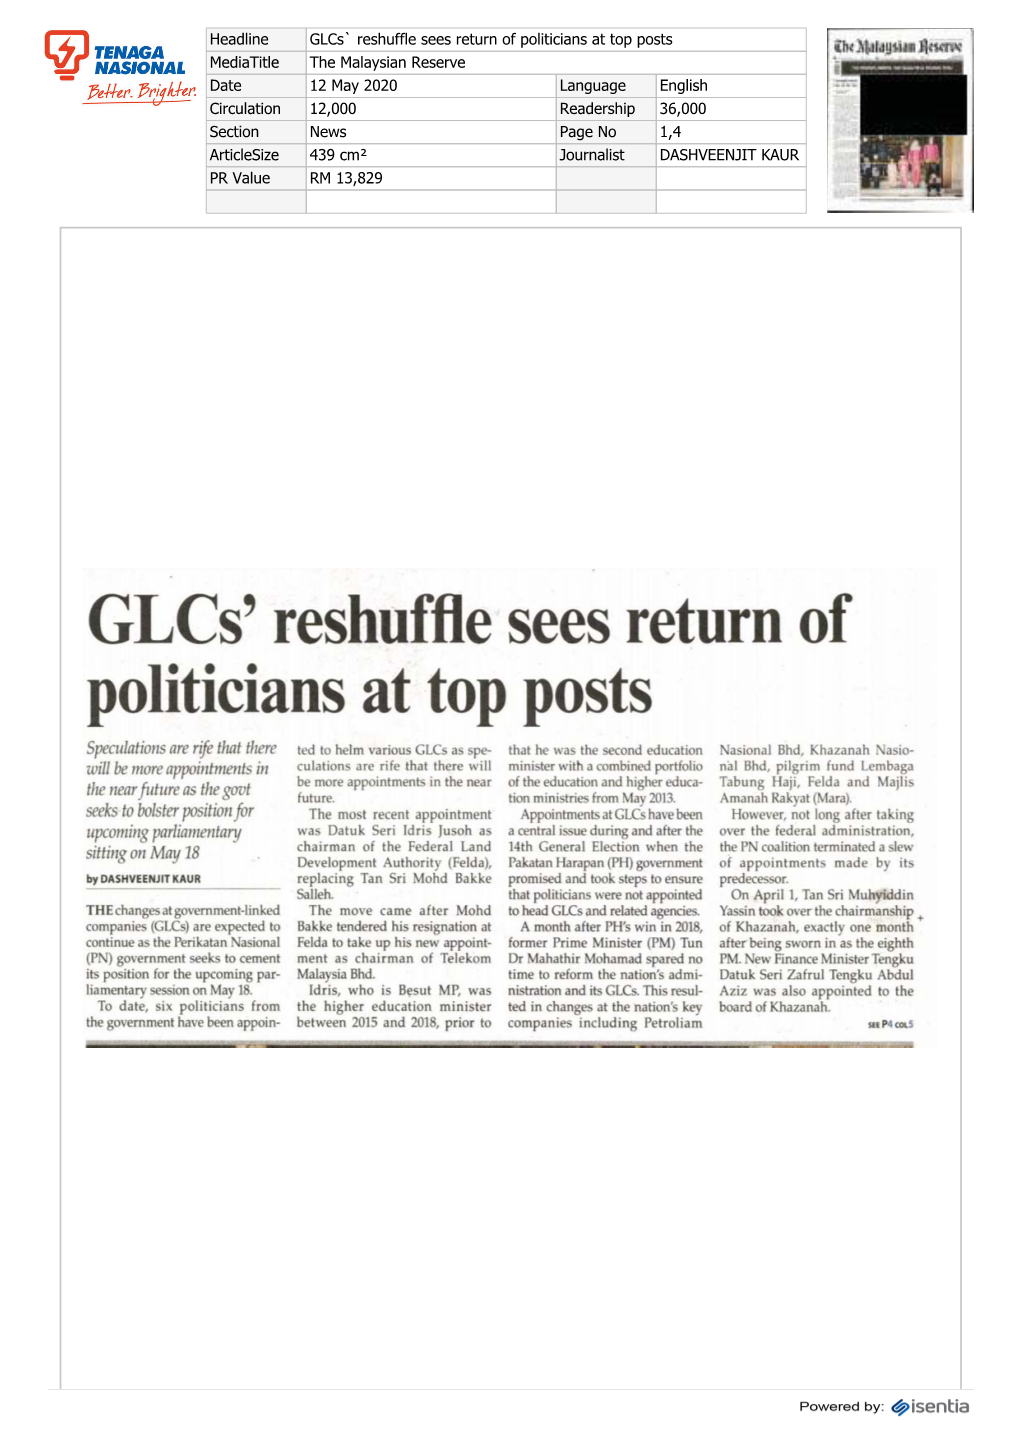 Glcs' Reshuffle Sees Return of Politicians at Top Posts